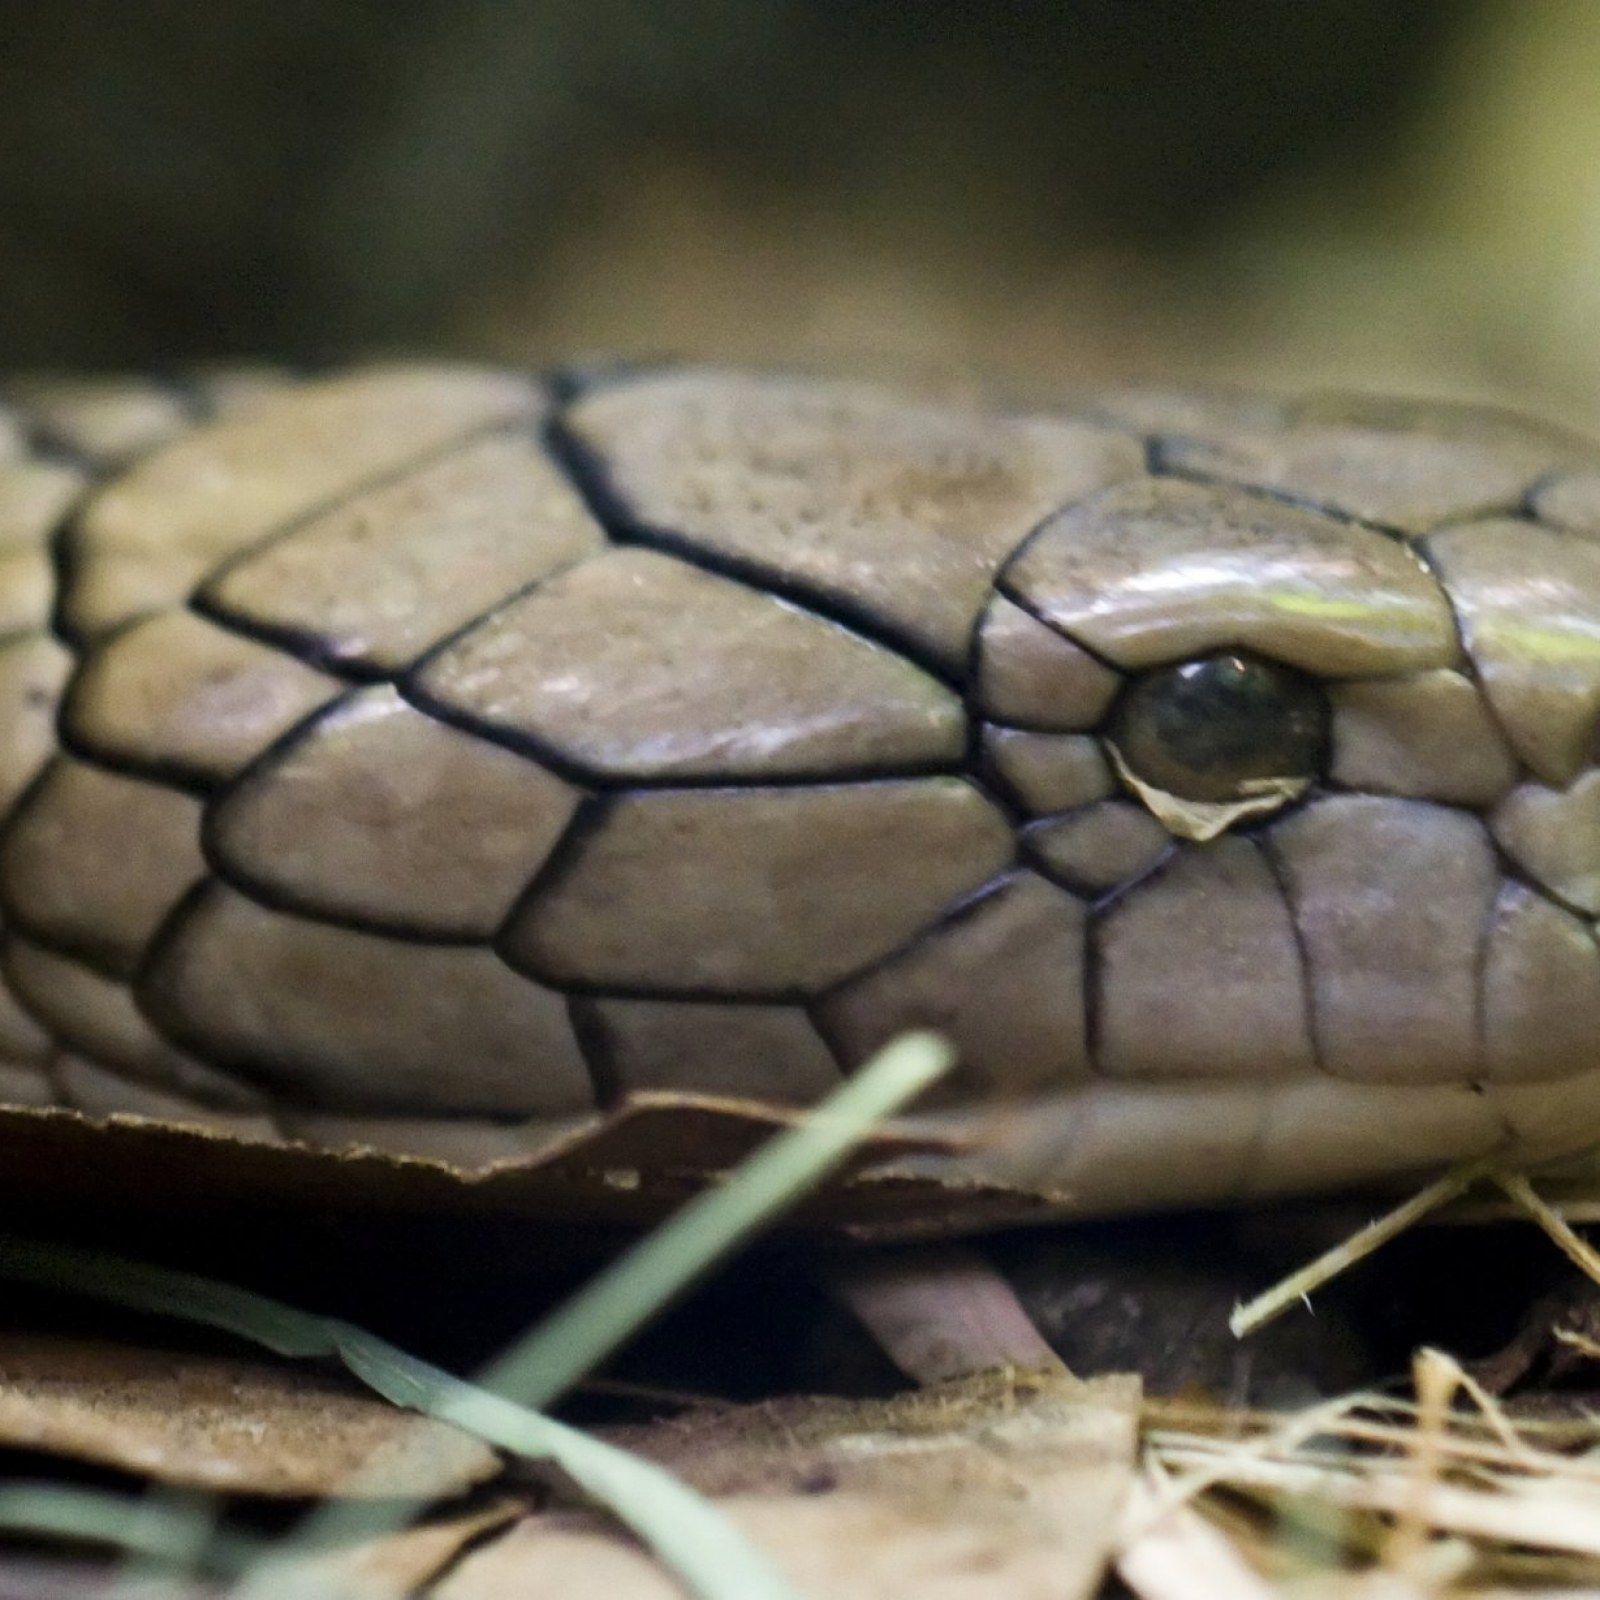 Florida Officials Call Off Active Search for King Cobra in Orlando